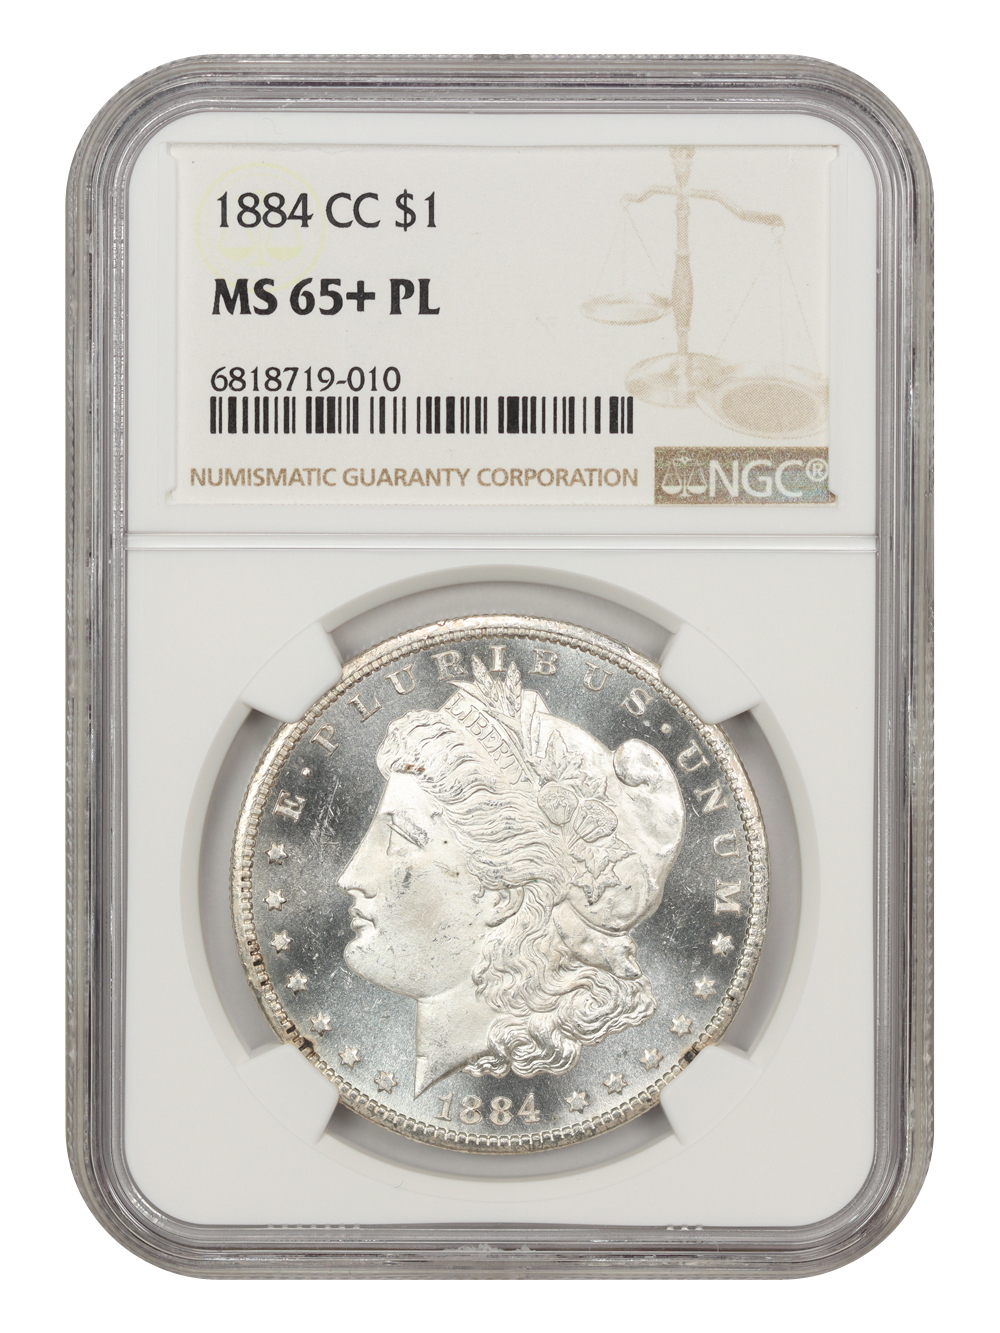 Primary image for 1884-CC $1 NGC MS65+PL